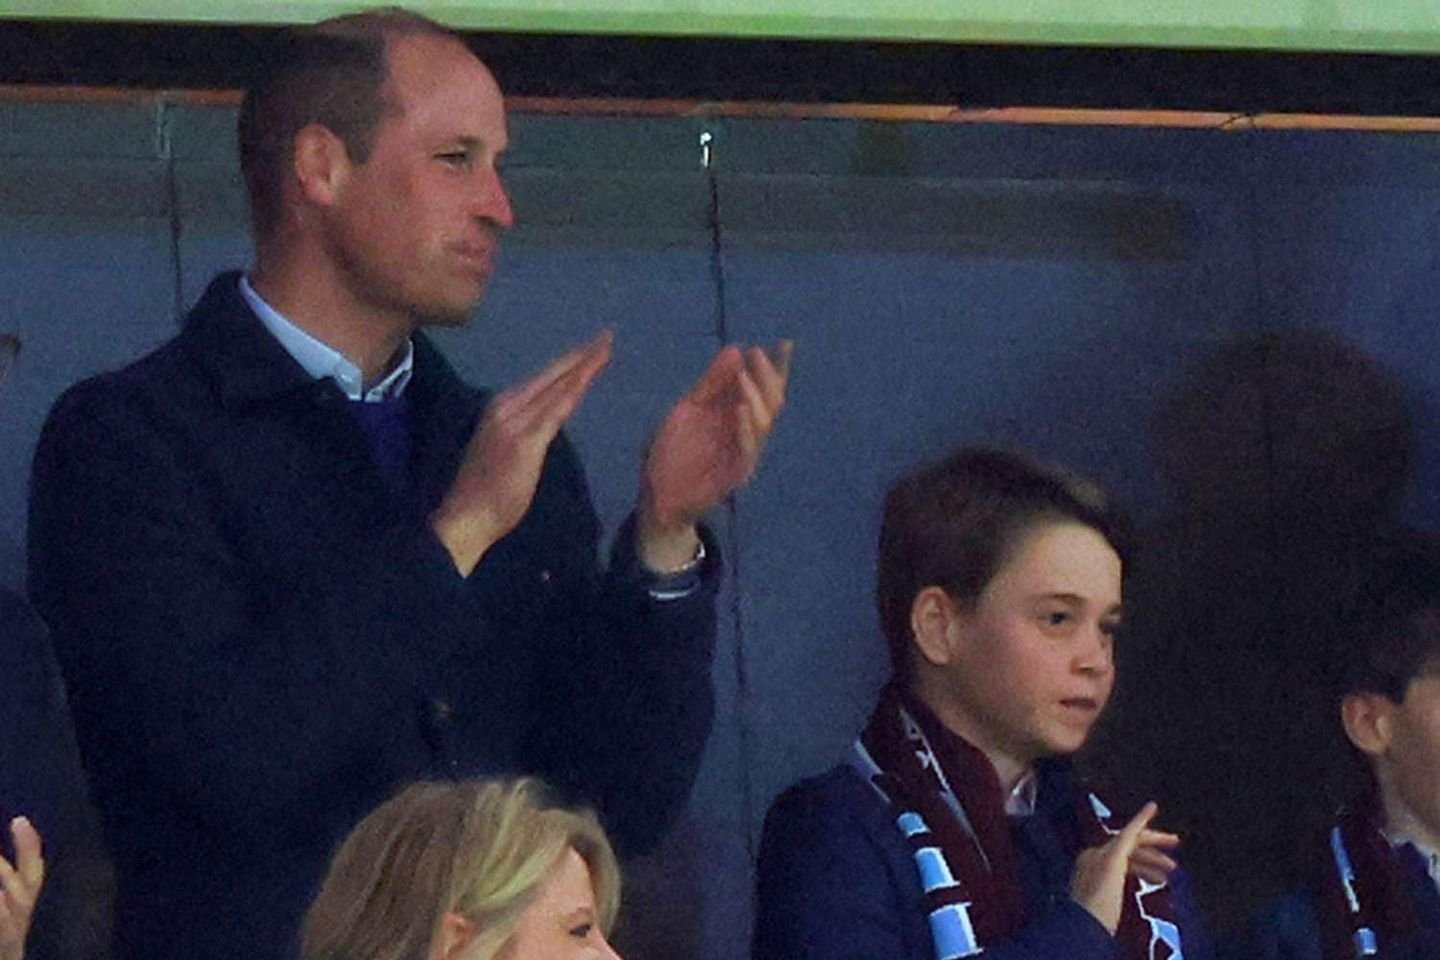 Prince George has everyone saying the same thing after surprise football trip with dad Prince William